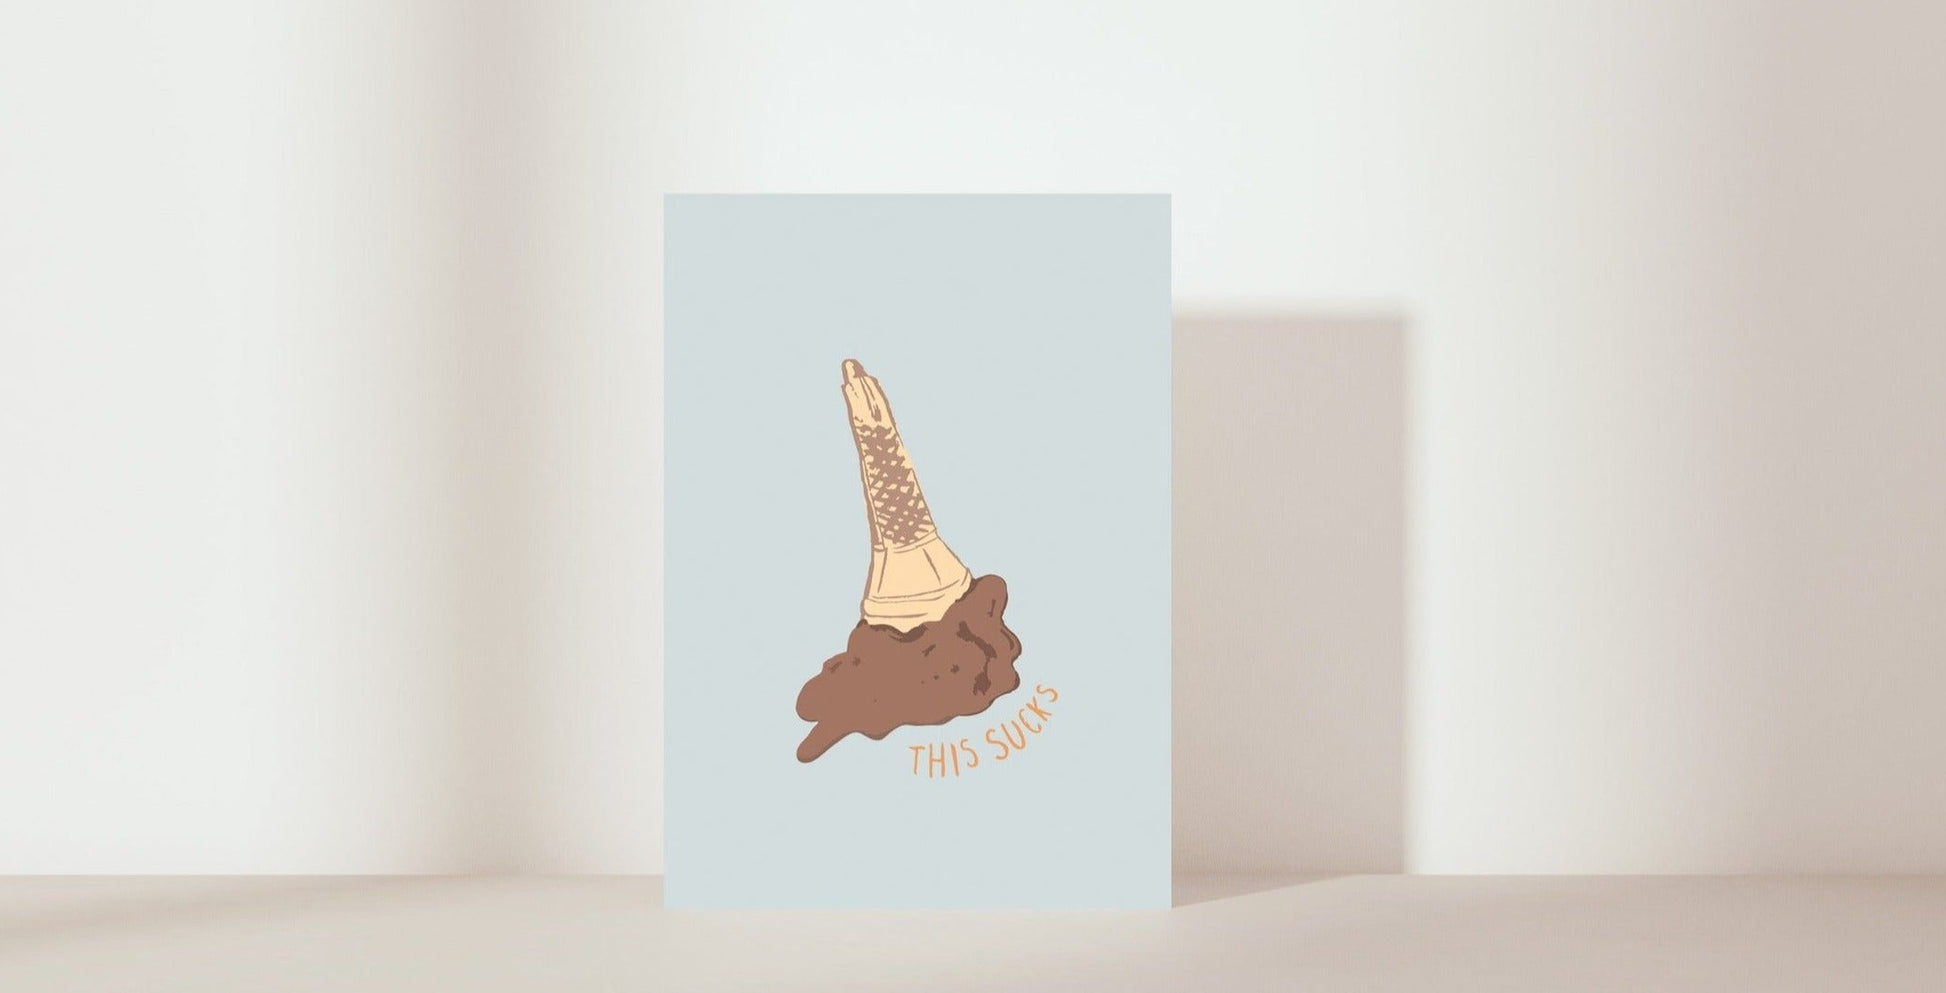 gift card illustration of upside down chocolate ice-cream in cone. Text = 'This sucks'. background colour = blue